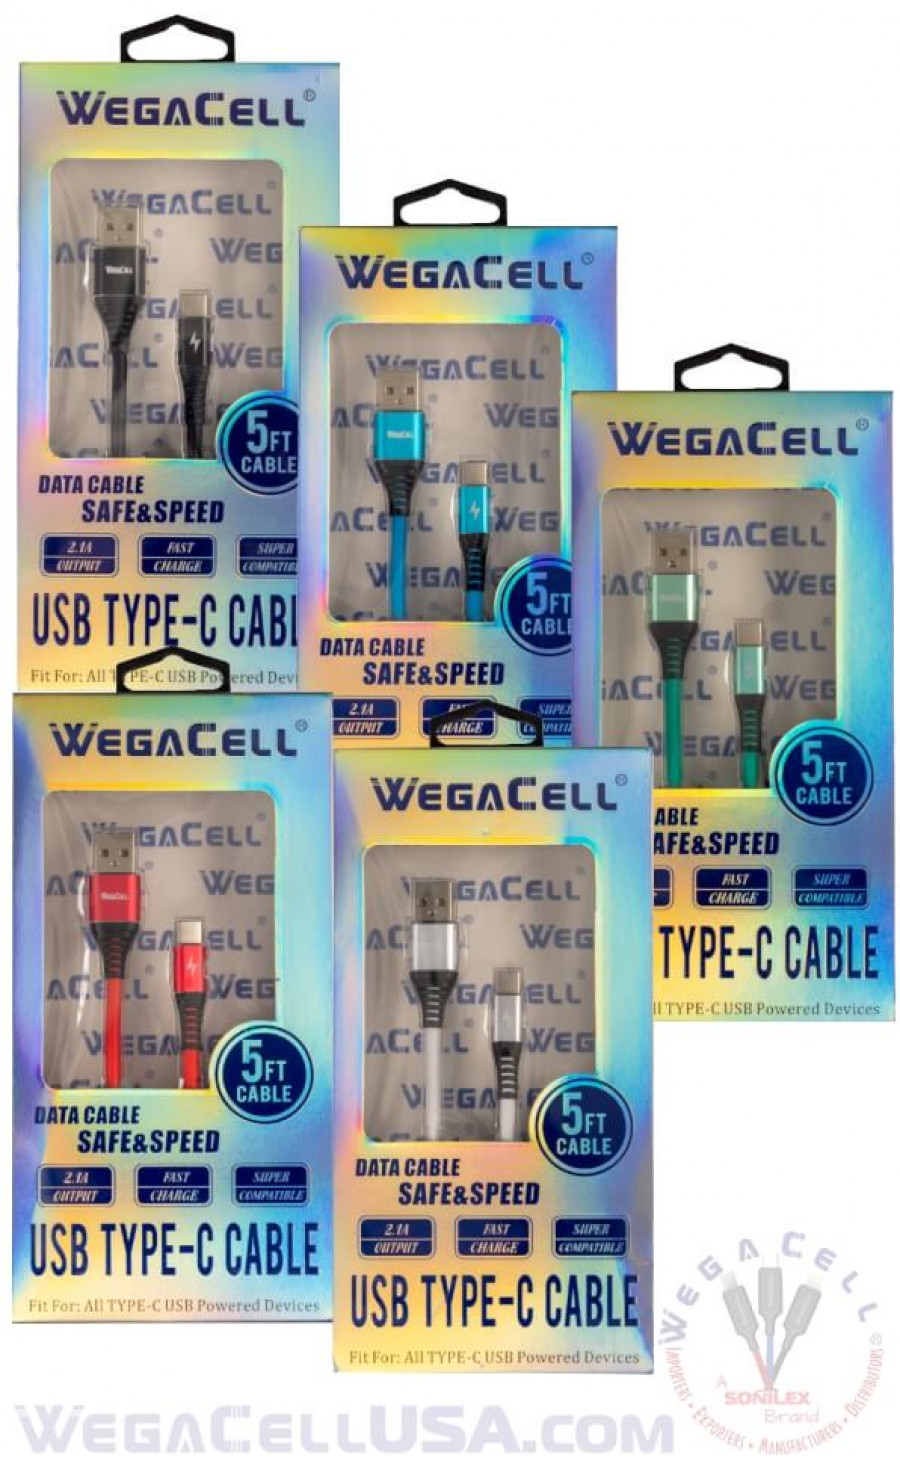 android type c usb braided fast charging 5 ft tpe data cable - wholesale pkg. wegacell: wl-5cbl12-tyc data cable 24